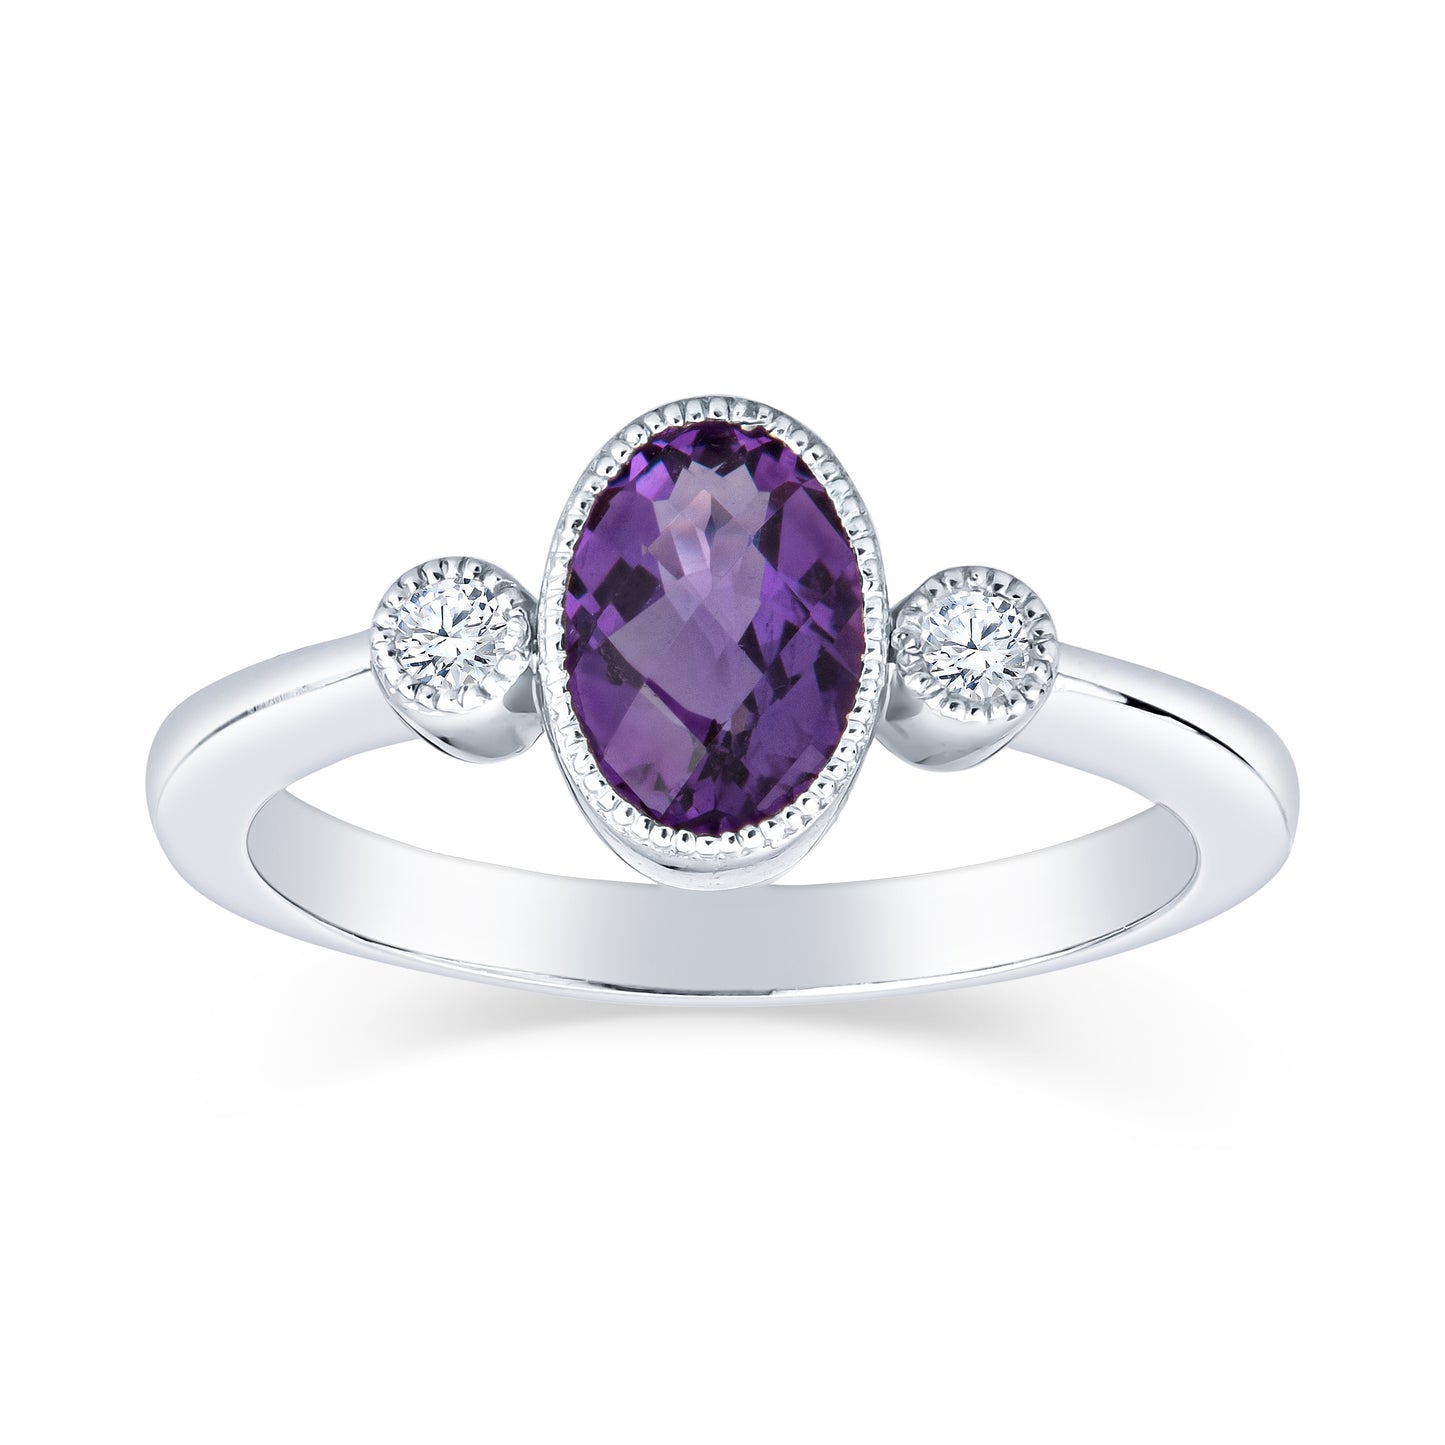 Antique Oval Amethyst and Diamond Ring